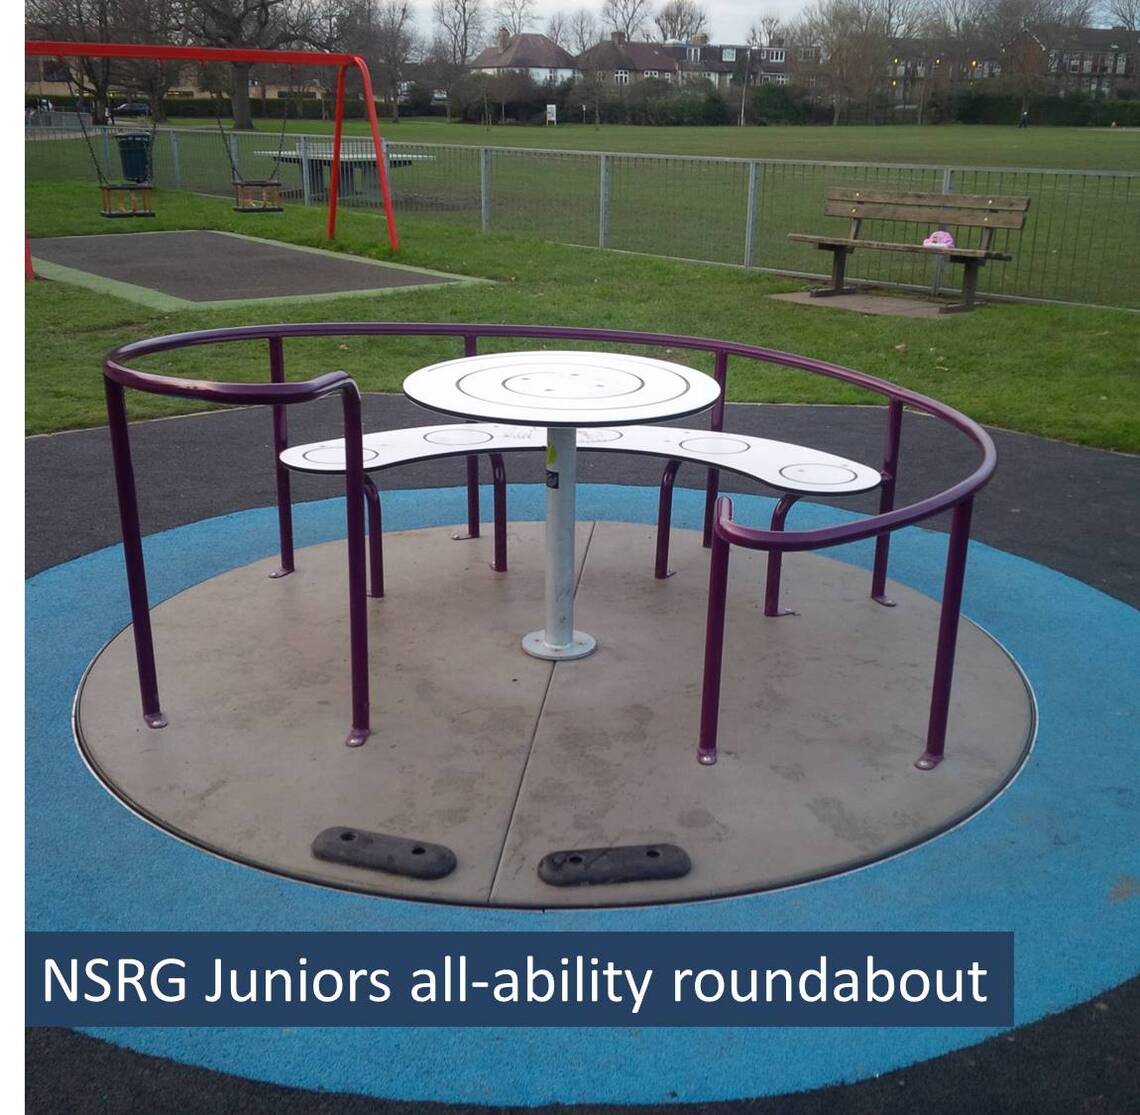 NSRG Juniors all-ability roundabout